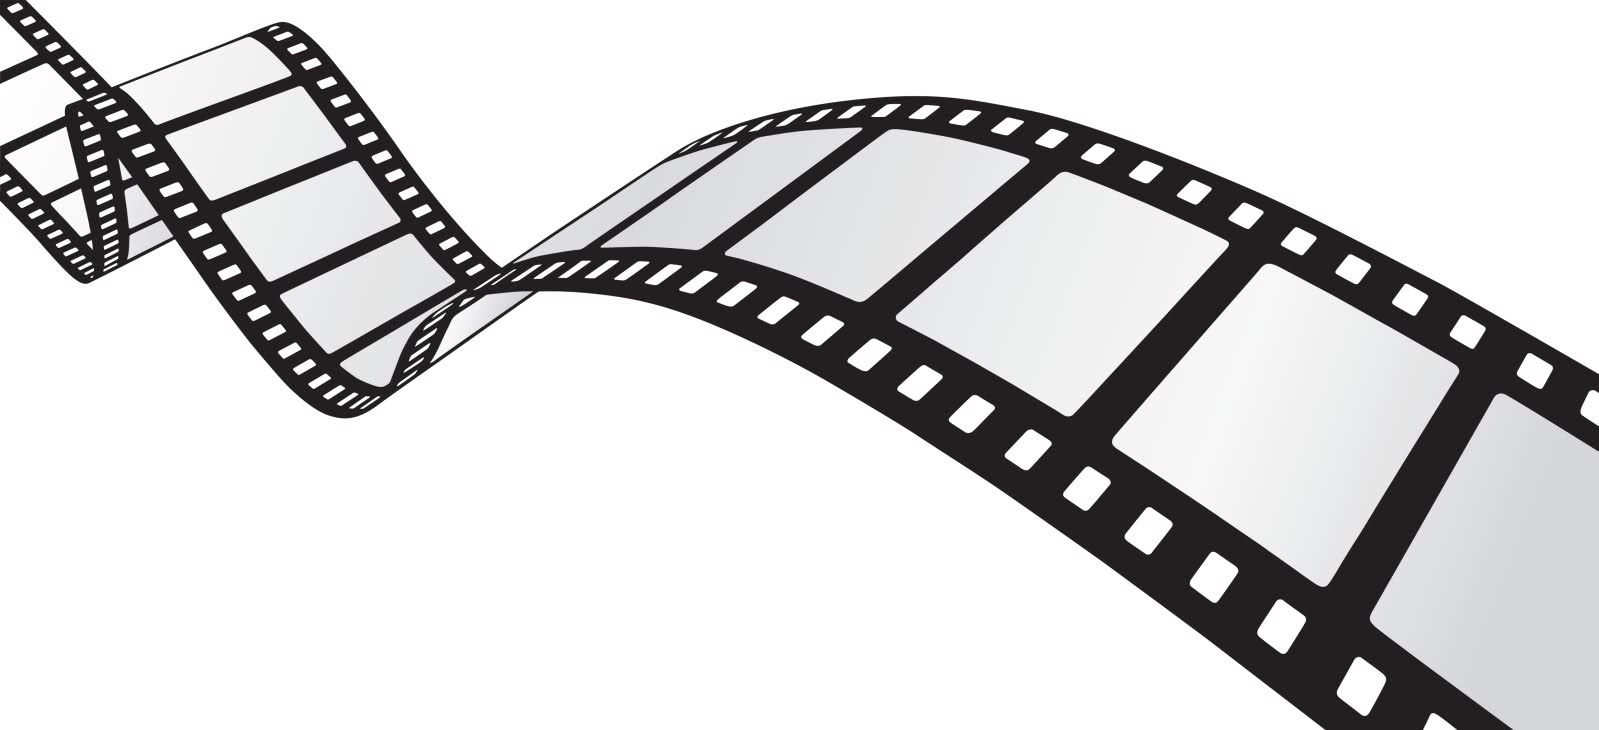 21 Film Reel Graphic Free Cliparts That You Can Download To You